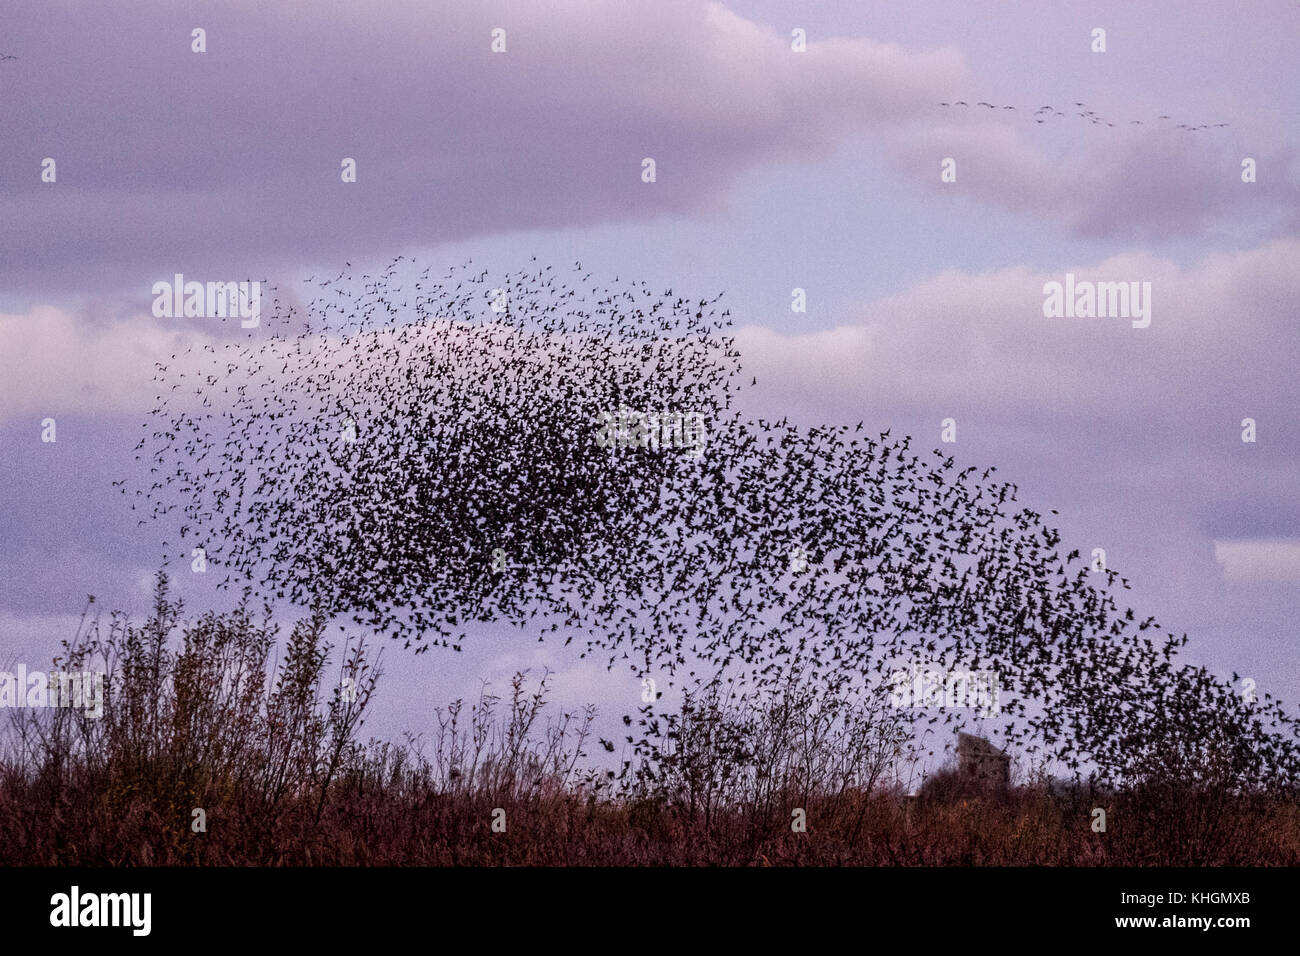 Burscough, Lancashire, UK Weather 16th November, 2017. Starling flocks mumurate over Martin Mere nature reserve at dawn as an estimated fifty thousand starlings take to the air after a cold night in rural Lancashire. The onset of winter triggers these mumurations as huge flocks of gregarious birds congregate to find communal roosts. The murmur or chatter, the interaction and communication between birds as they fly, is quite intense. These displays are the largest seen in the last for 12 years and are attracting large numbers of birdwatchers to the area. Credit. MediaWorldImages/AlamyLiveNews Stock Photo